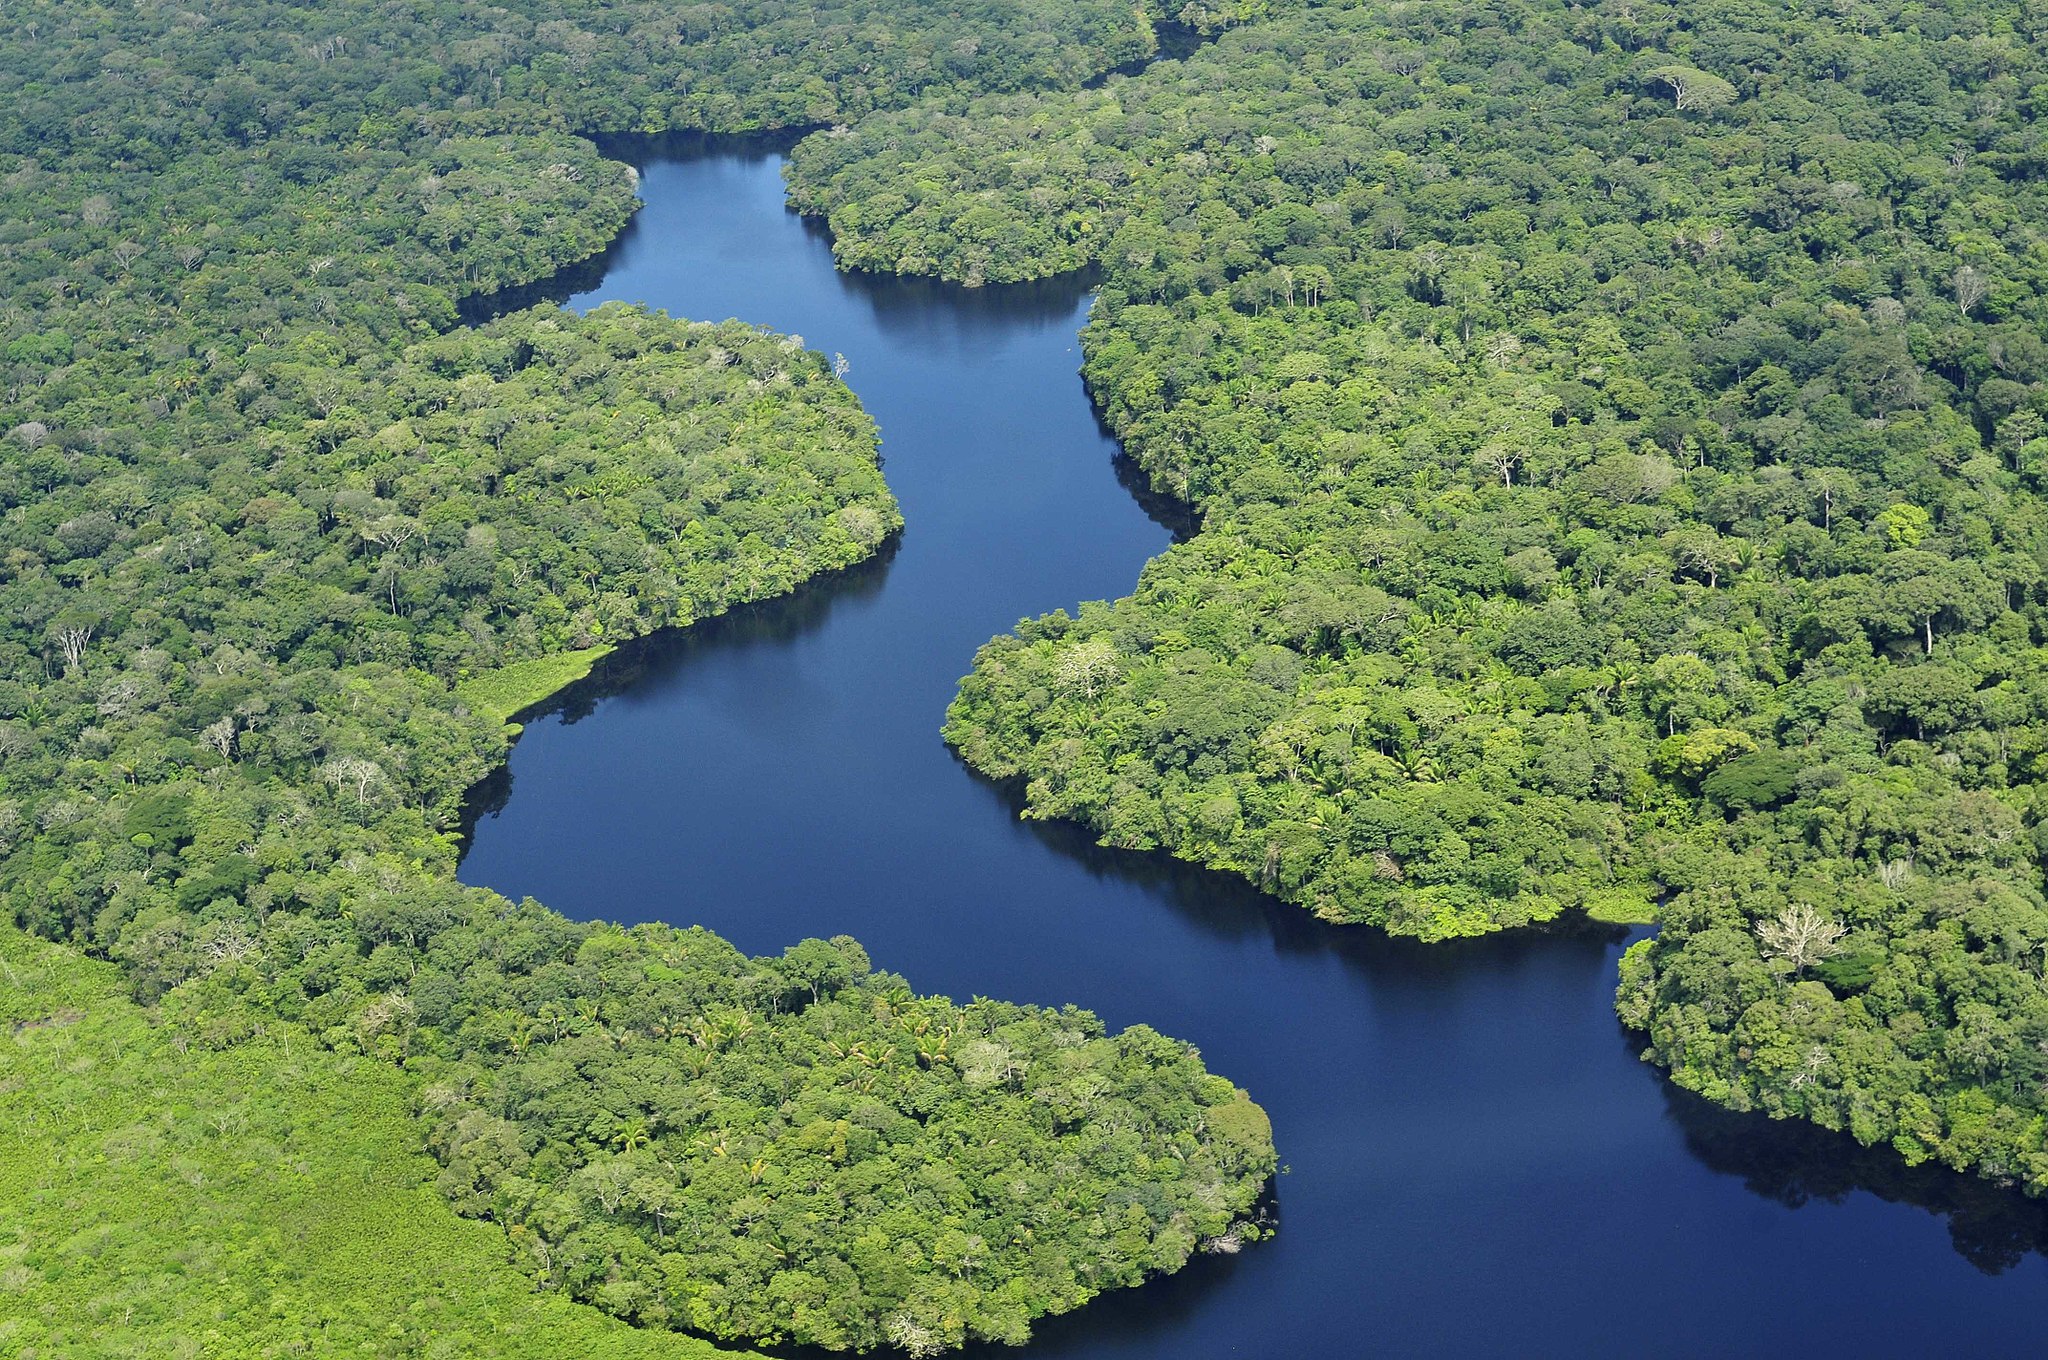 Saving and restoring tropical forests has enormous value for the planet and the economy